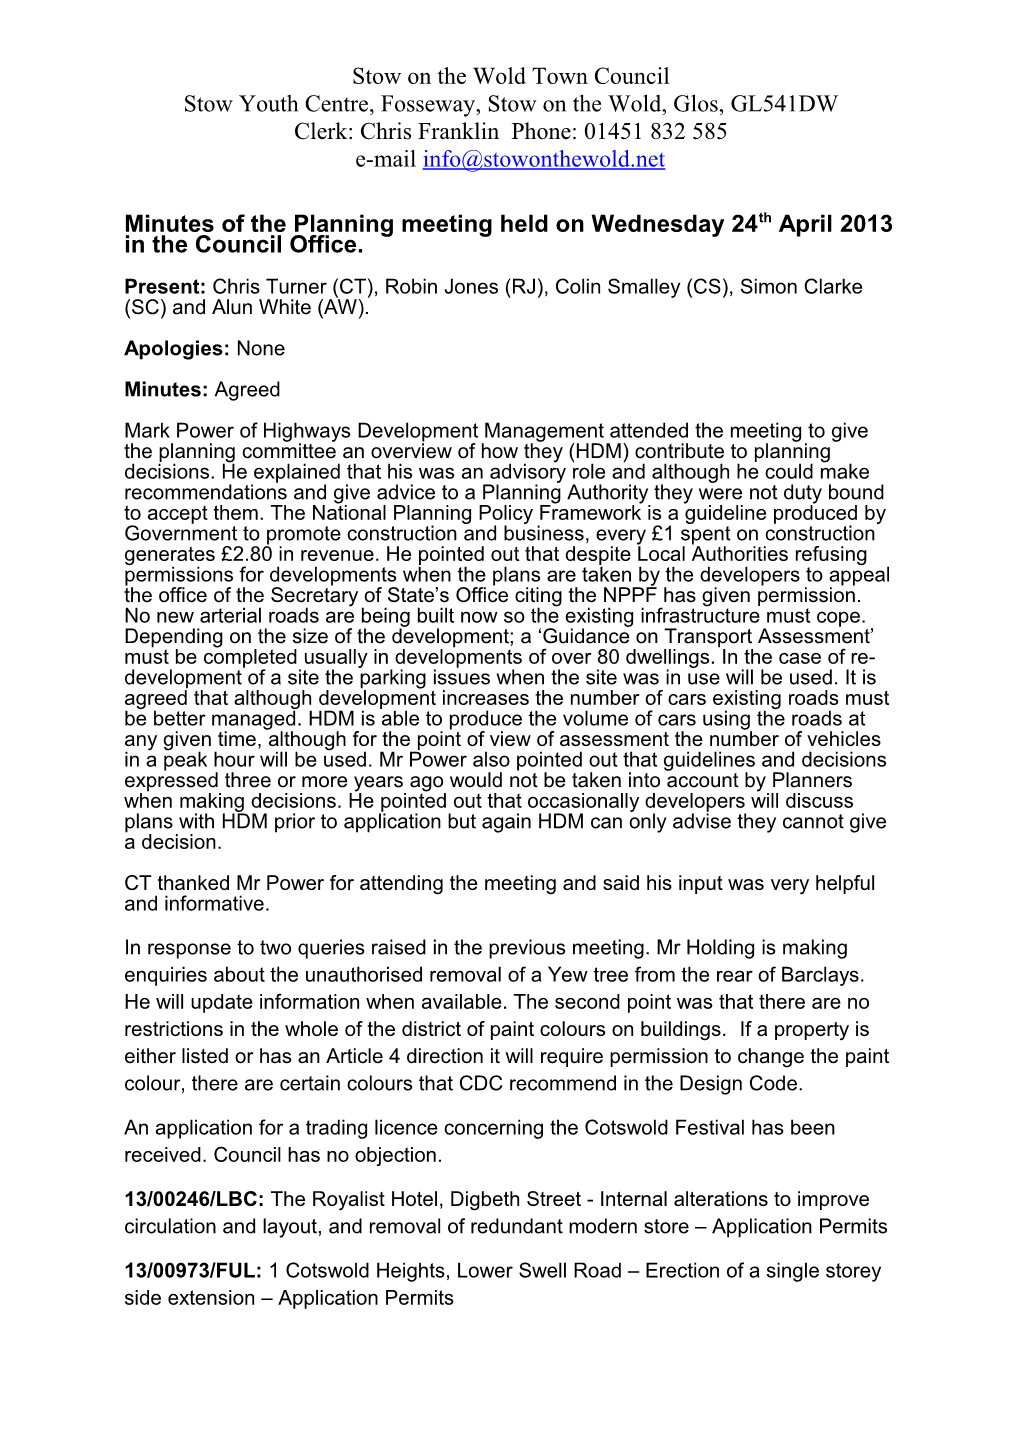 Minutes of the Planning Meeting Held on Wednesday 2 January 2013 in the Council Office